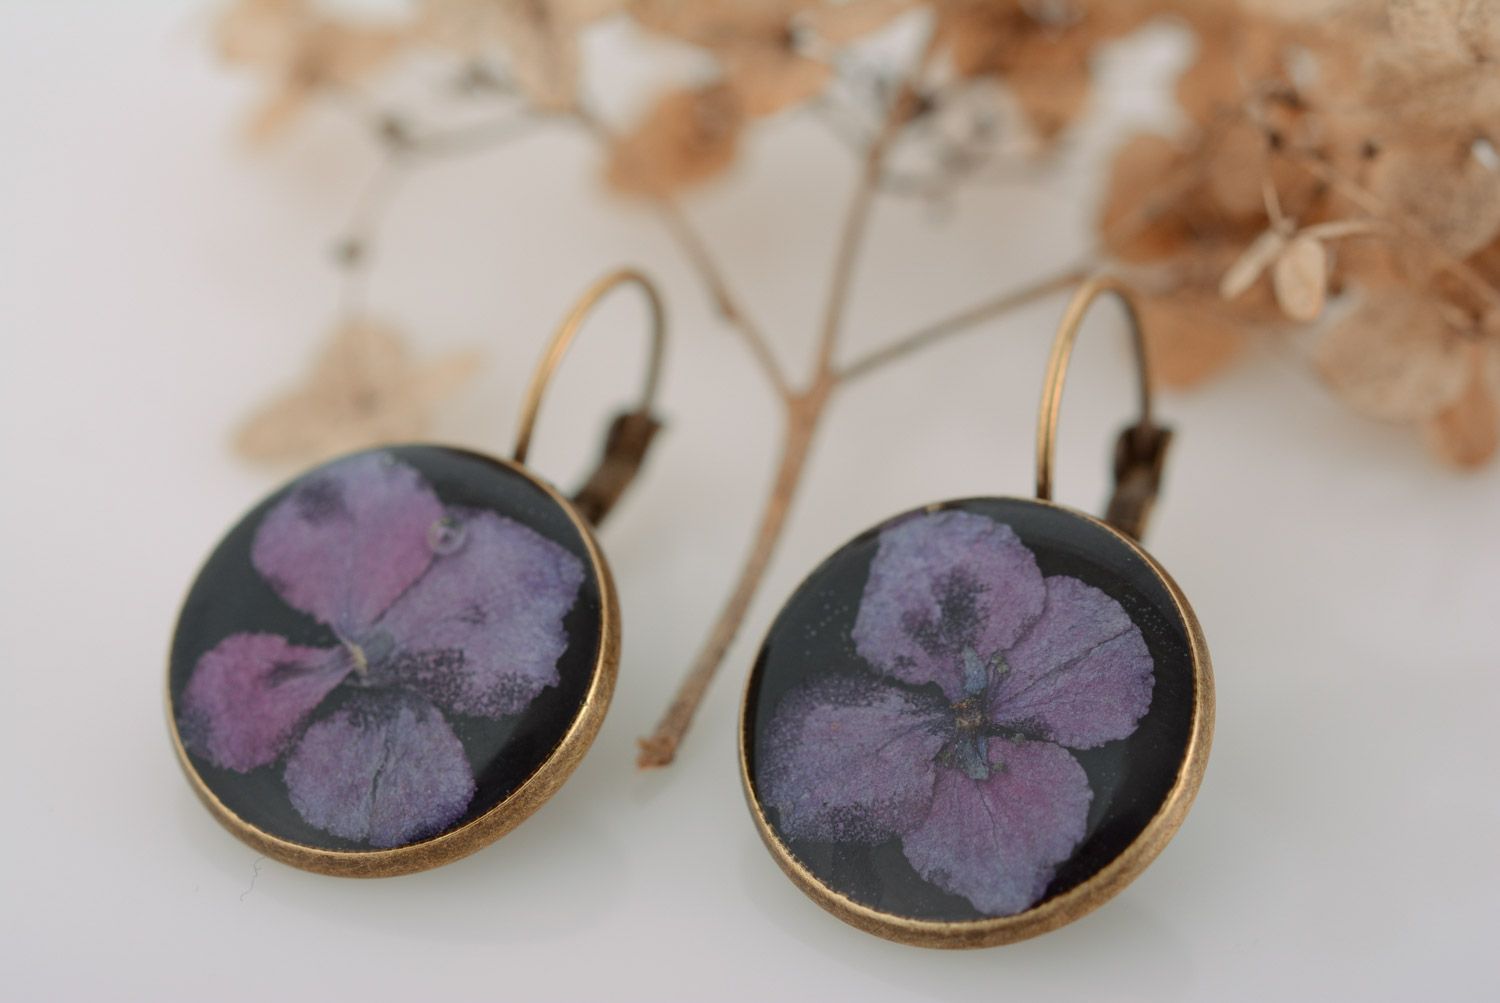 Homemade round black dangle earrings with violet flowers in epoxy resin photo 1